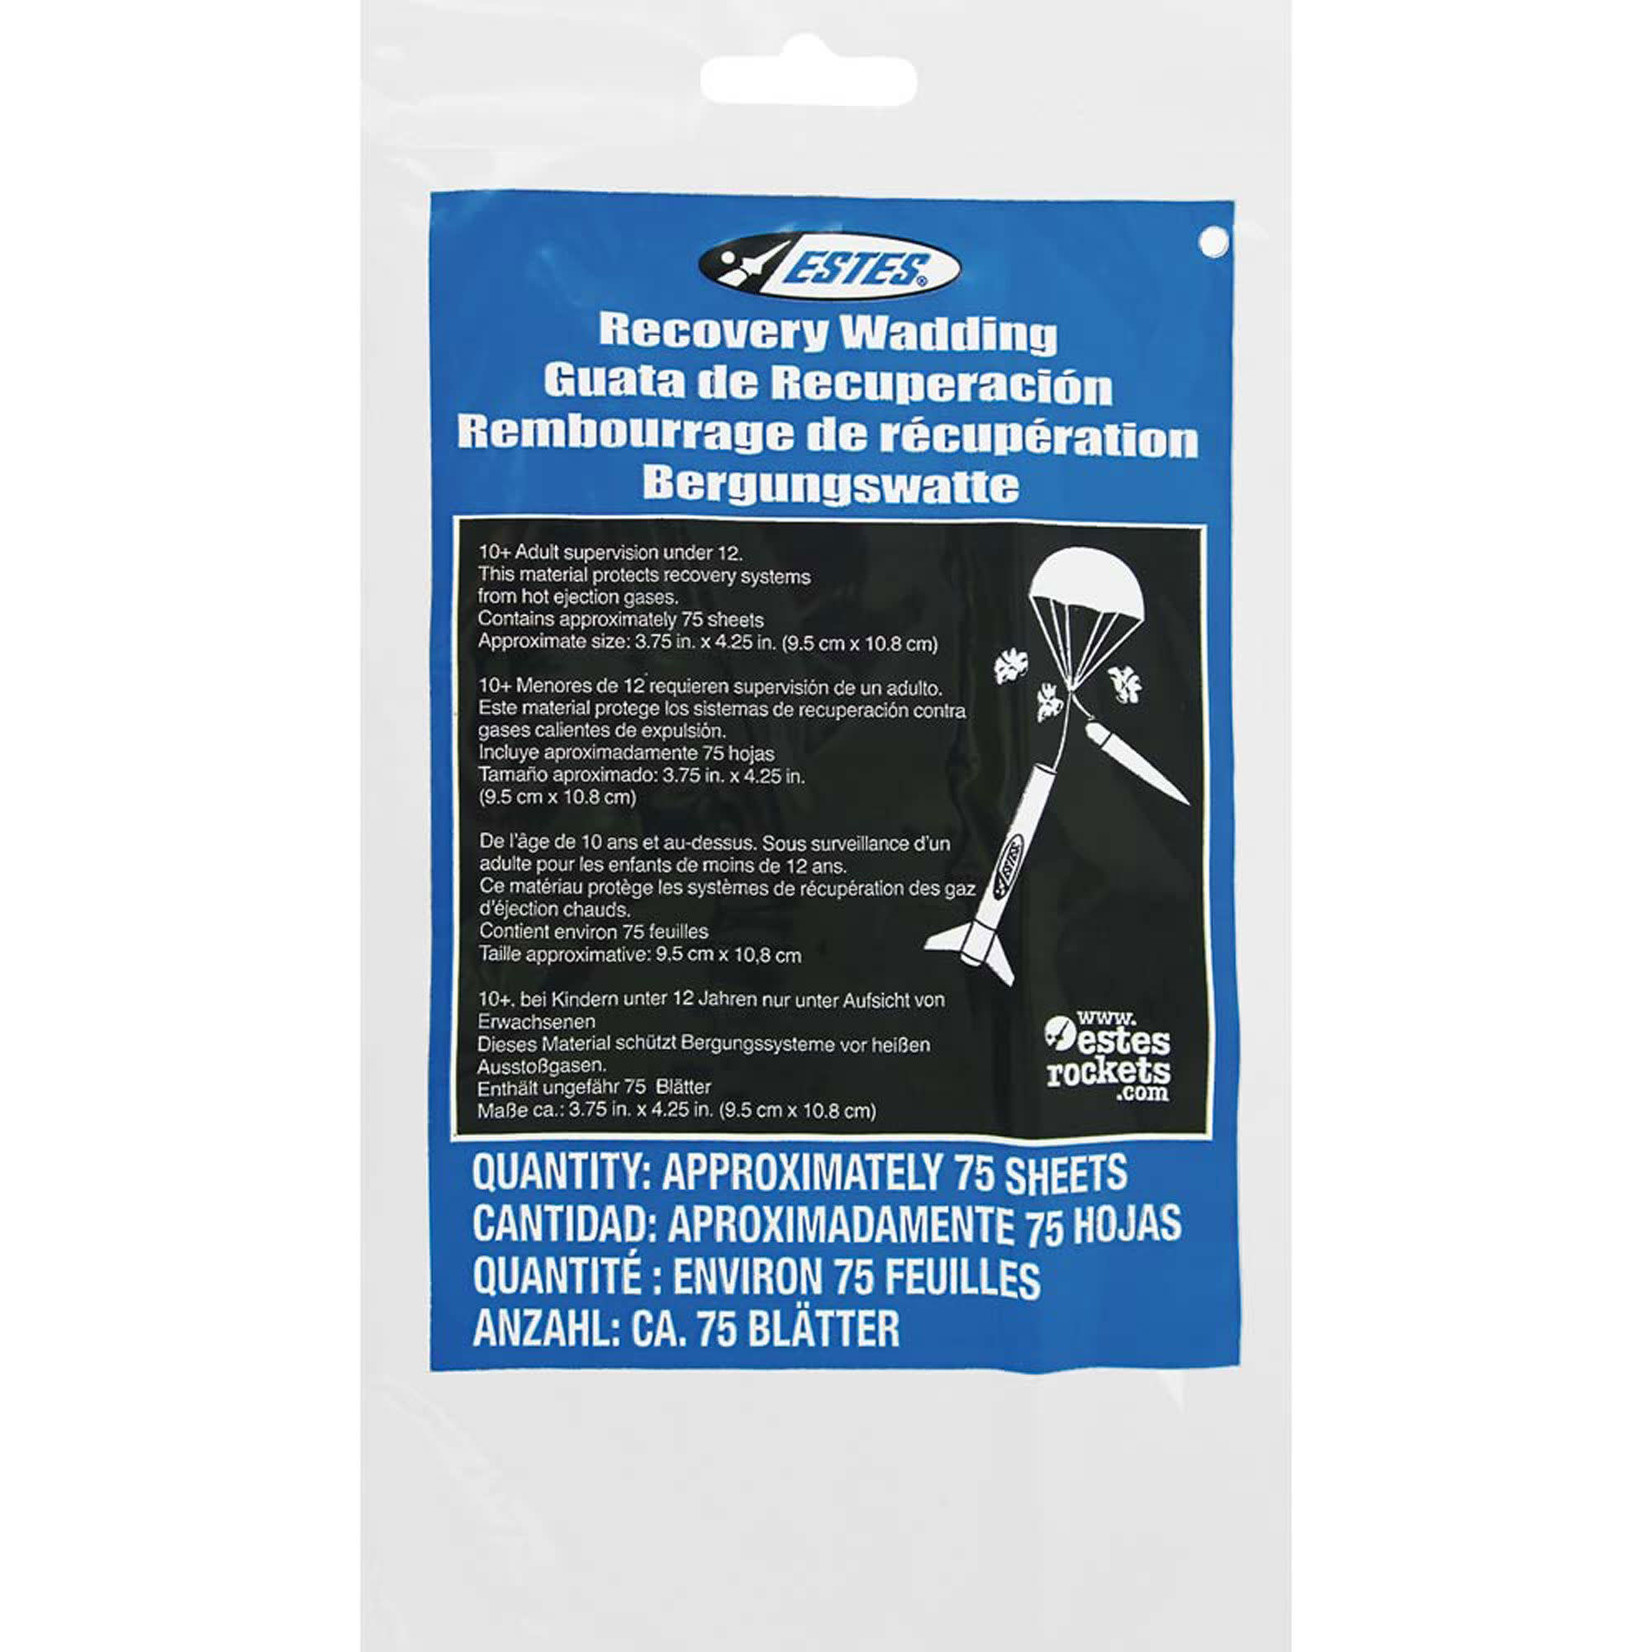 Estes EST2274 Estes Recovery Wadding (75 Sheets Per Pack, Enough for 18 to 25 Flights)